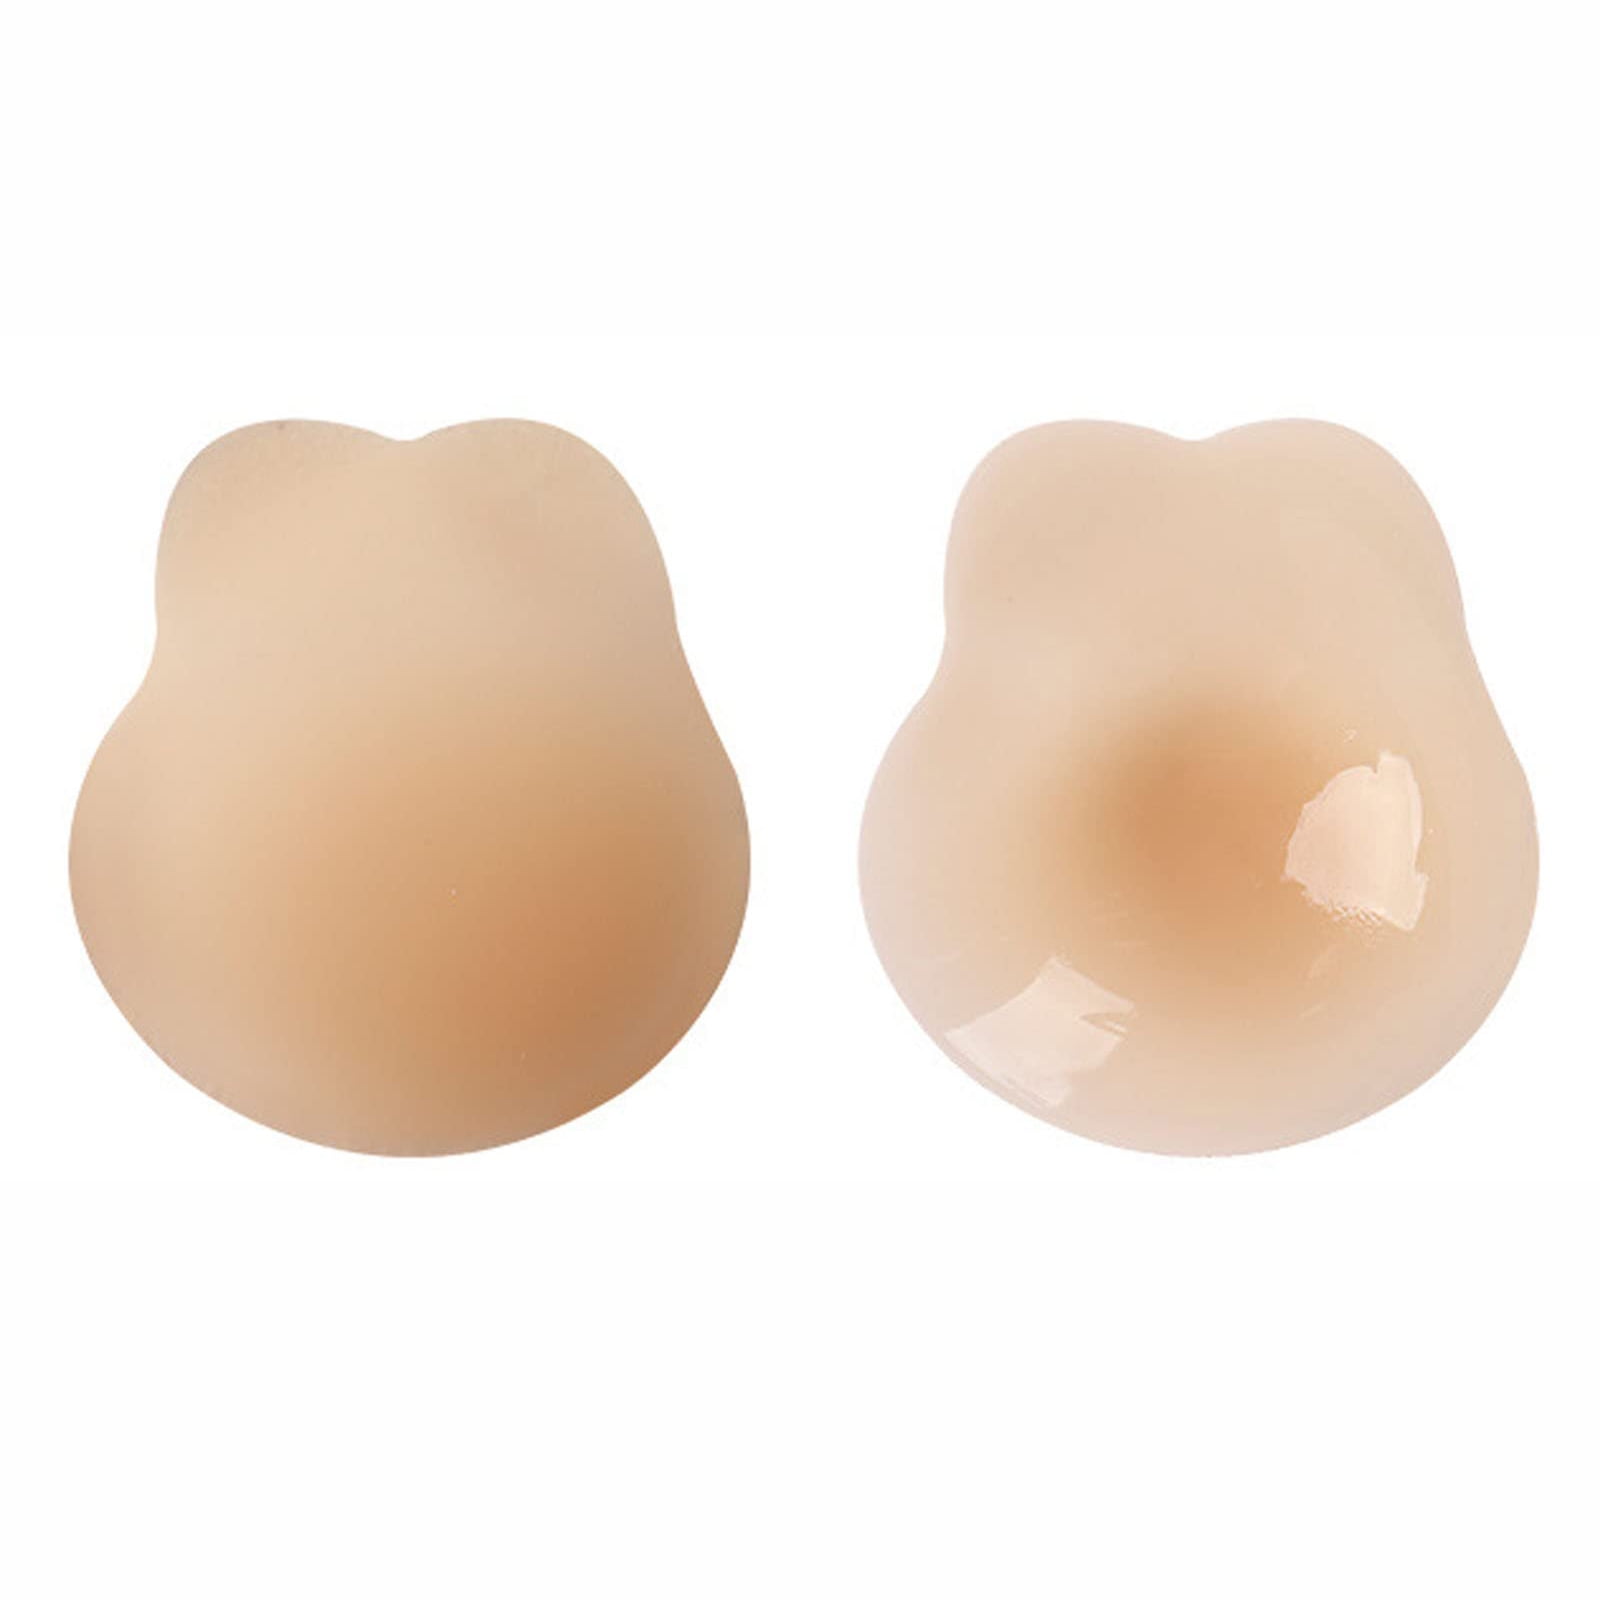 Bubble Wear  Sticky Bras and Nipple Covers Collection